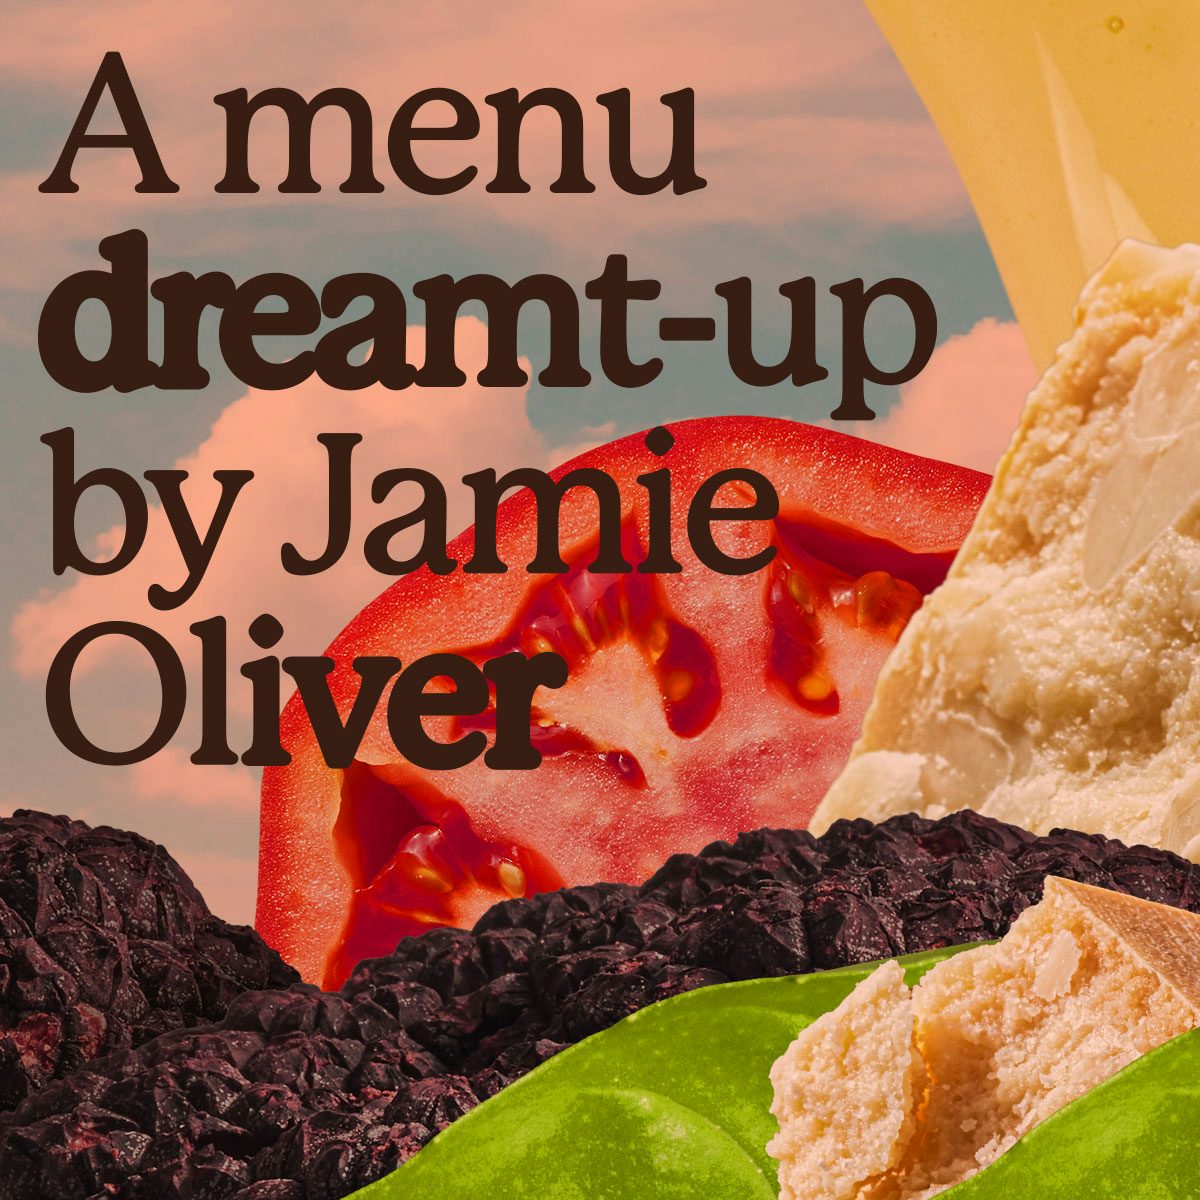 Image shows a collage of ingredients with the headline 'A menu dreamt up by Jamie Oliver'